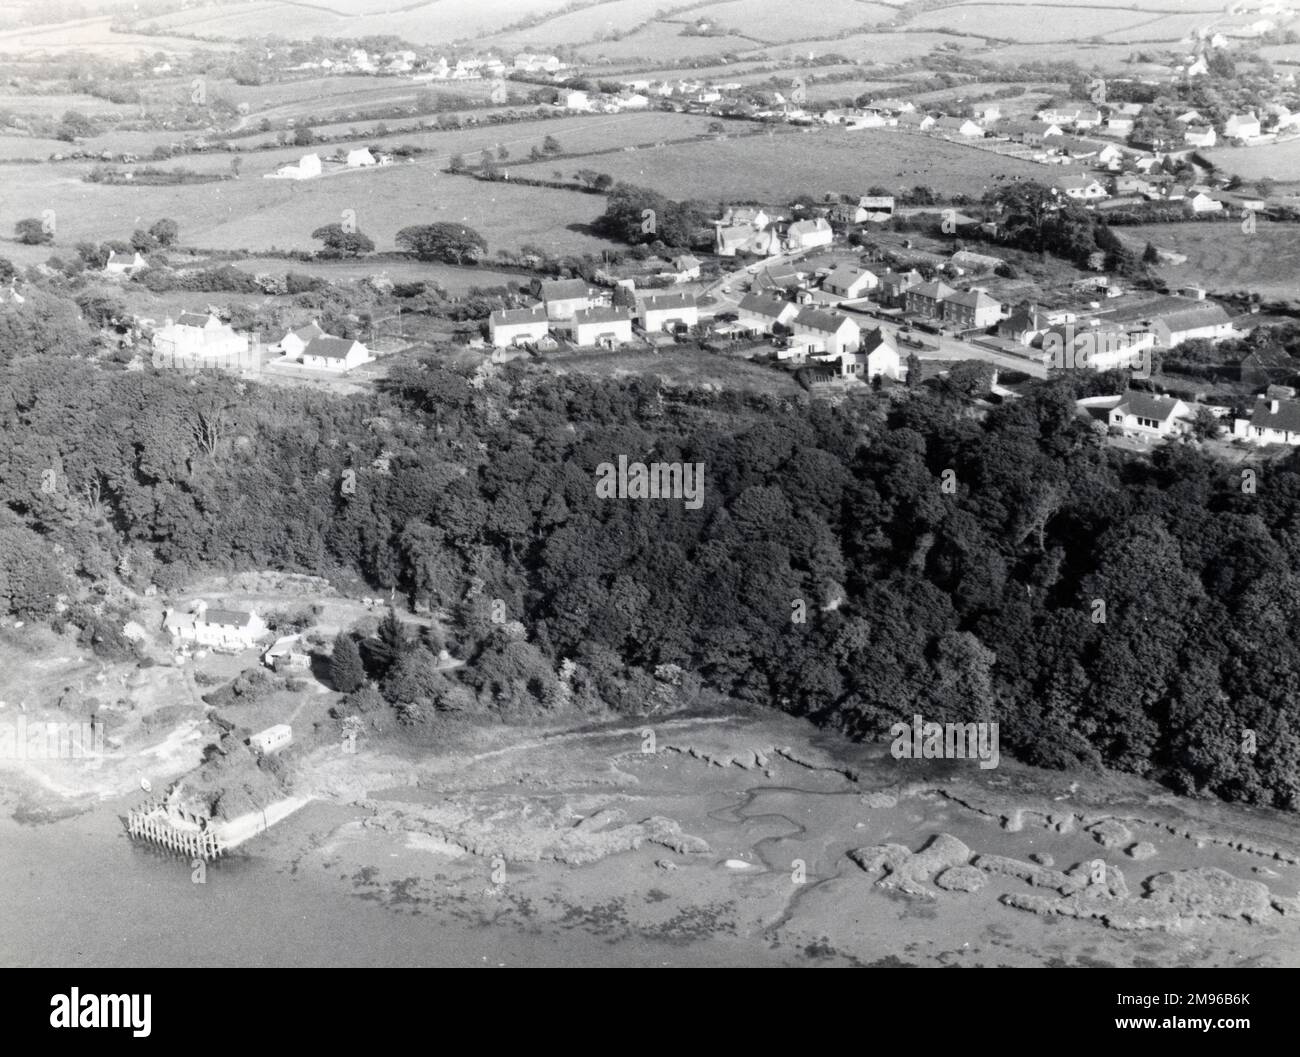 An aerial view of the coastal village of Hook, on the Western Cleddau, near Haverfordwest, Pembrokeshire, South Wales.  The quay can be seen in the foreground -- it was constructed in the late 18th century to facilitate the transportation of coal from Hook Colliery, which closed in 1947. Stock Photo